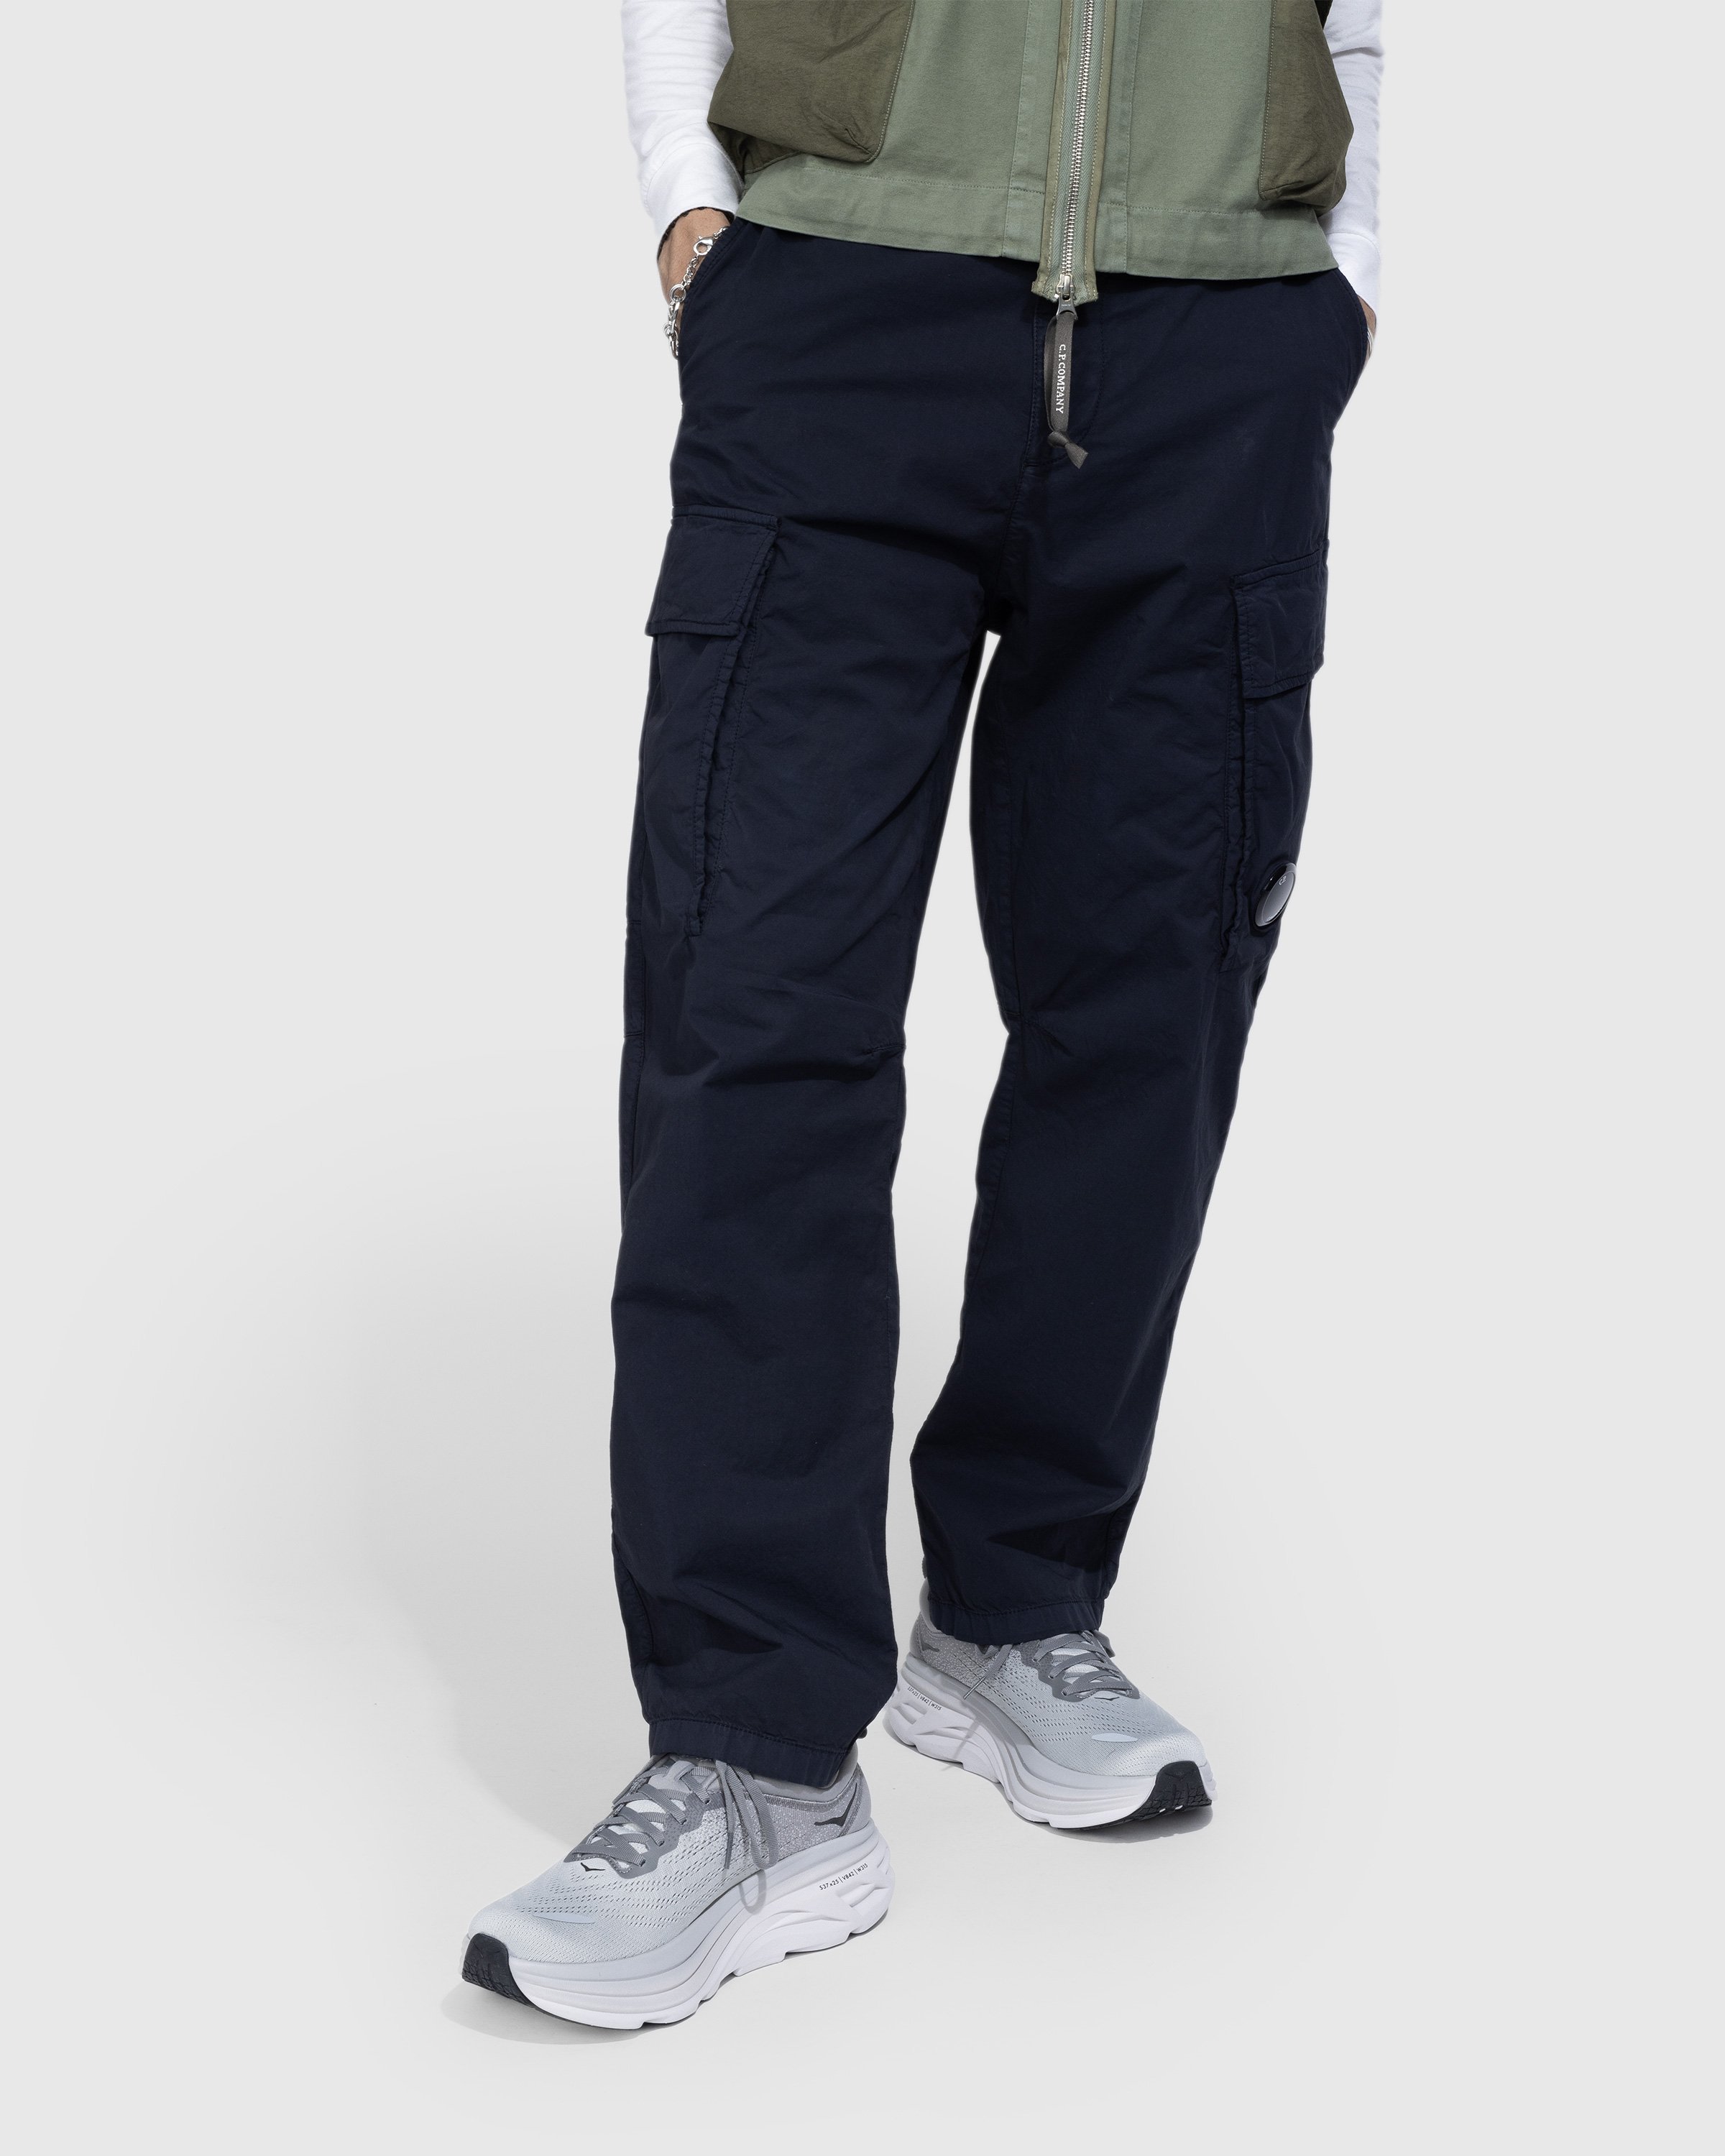 C.P. Company - Twill Stretch Cargo Pants Total Eclipse Blue - Clothing - Blue - Image 2